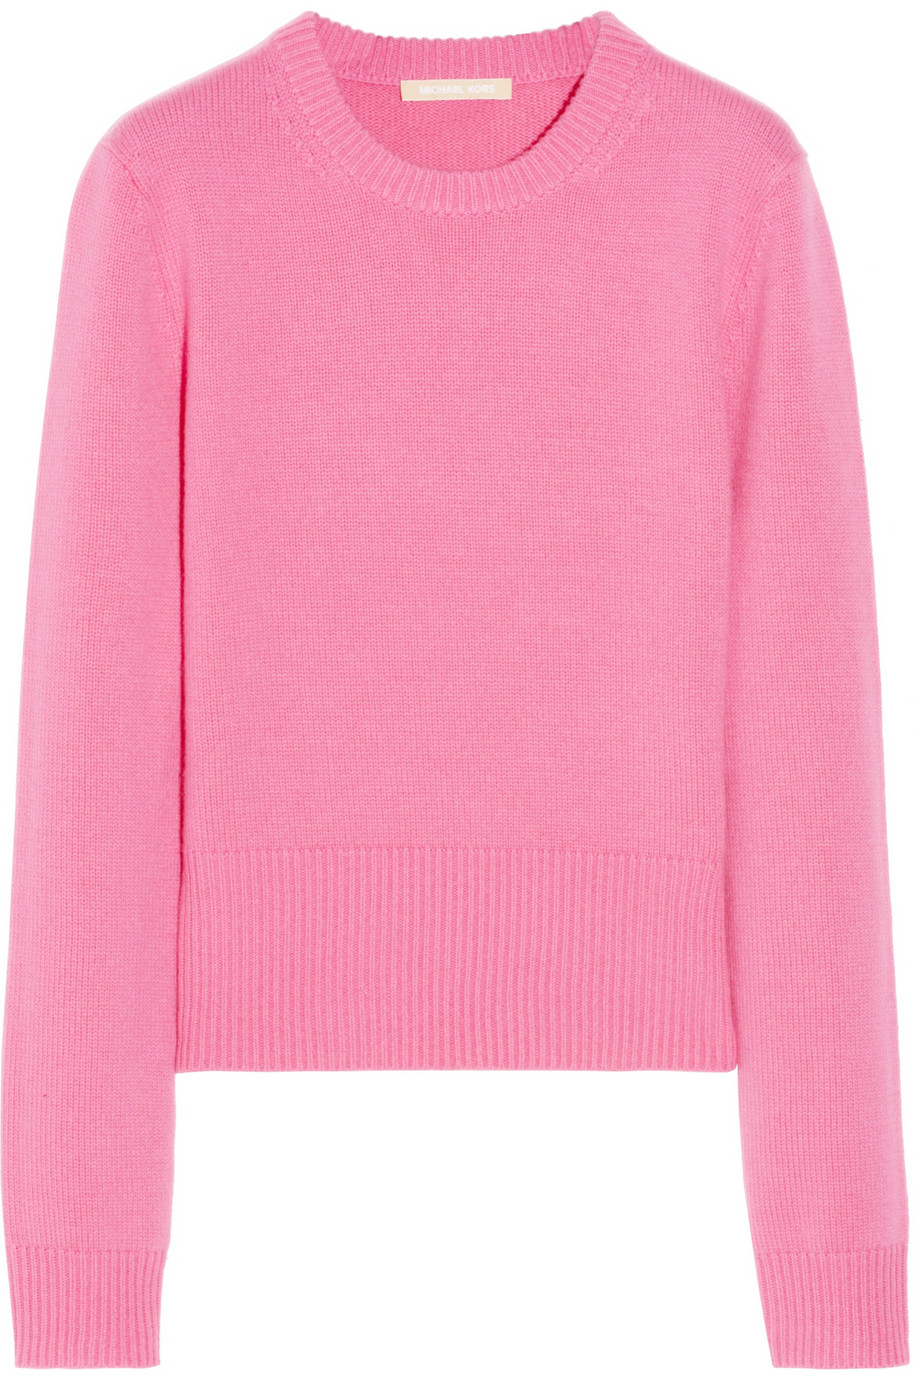 Lyst - Michael kors Cashmere Sweater in Pink